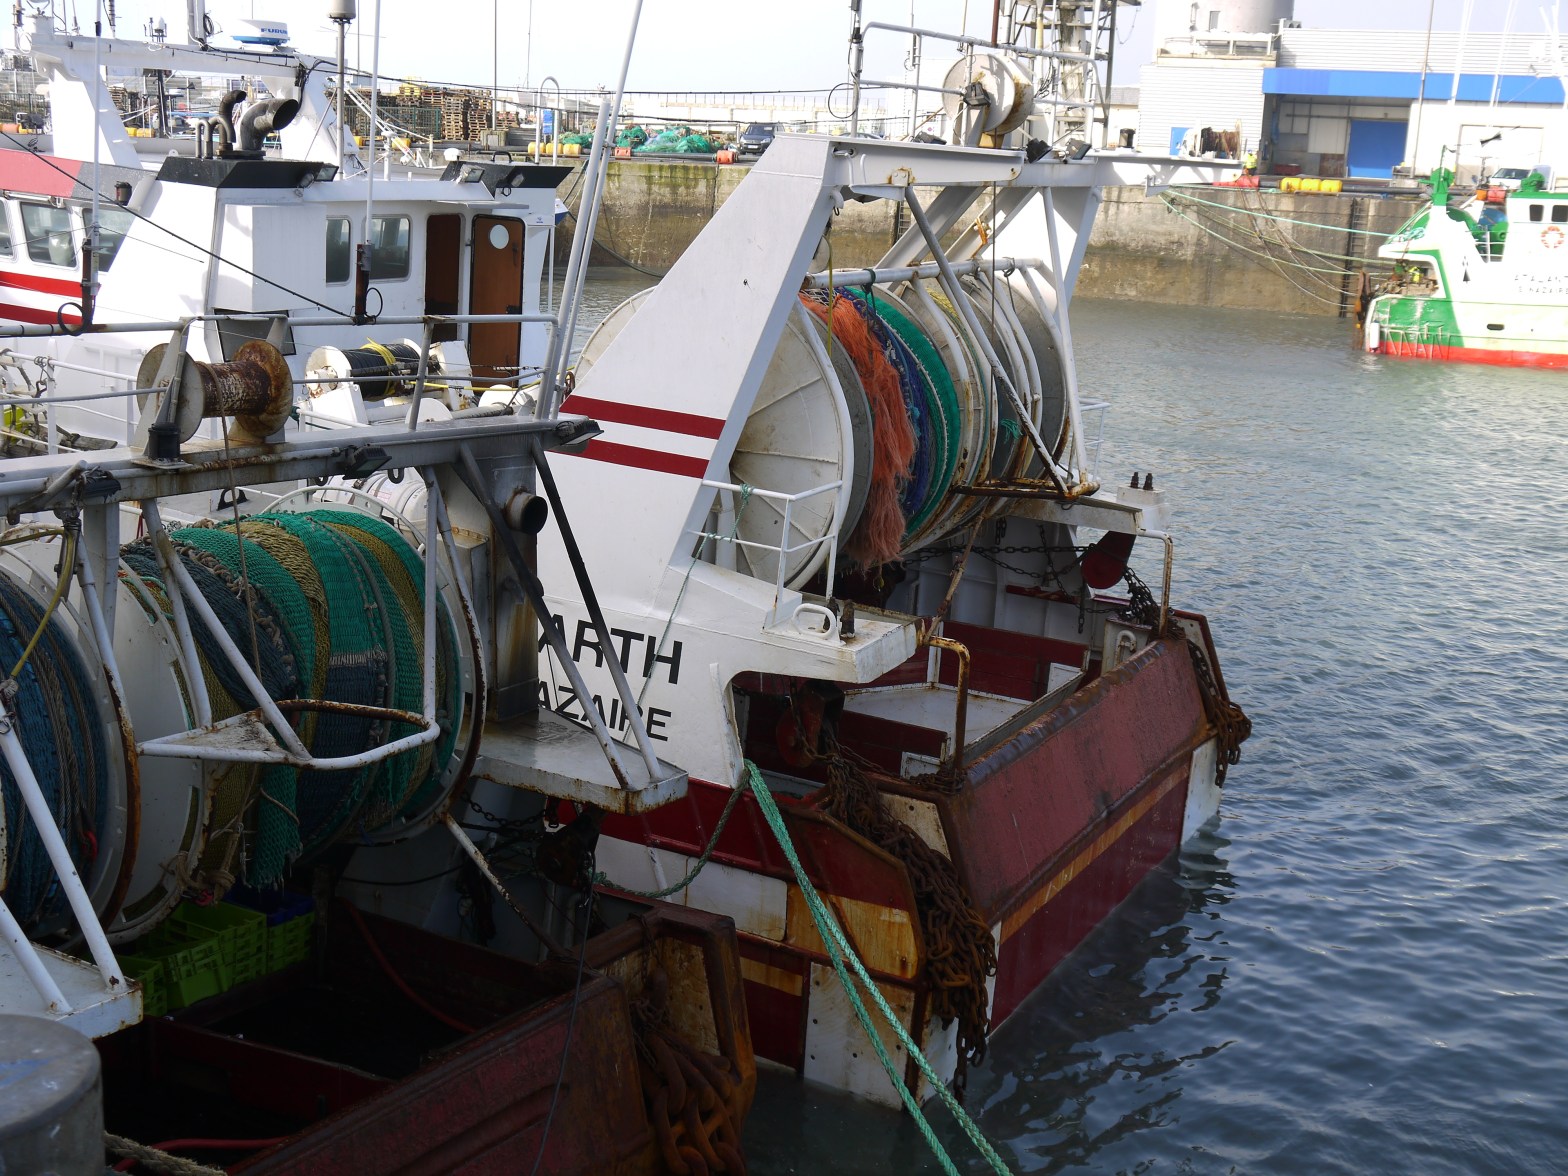 EUFA has implored the European Commission to honour the commitment made to the EU fishing industry